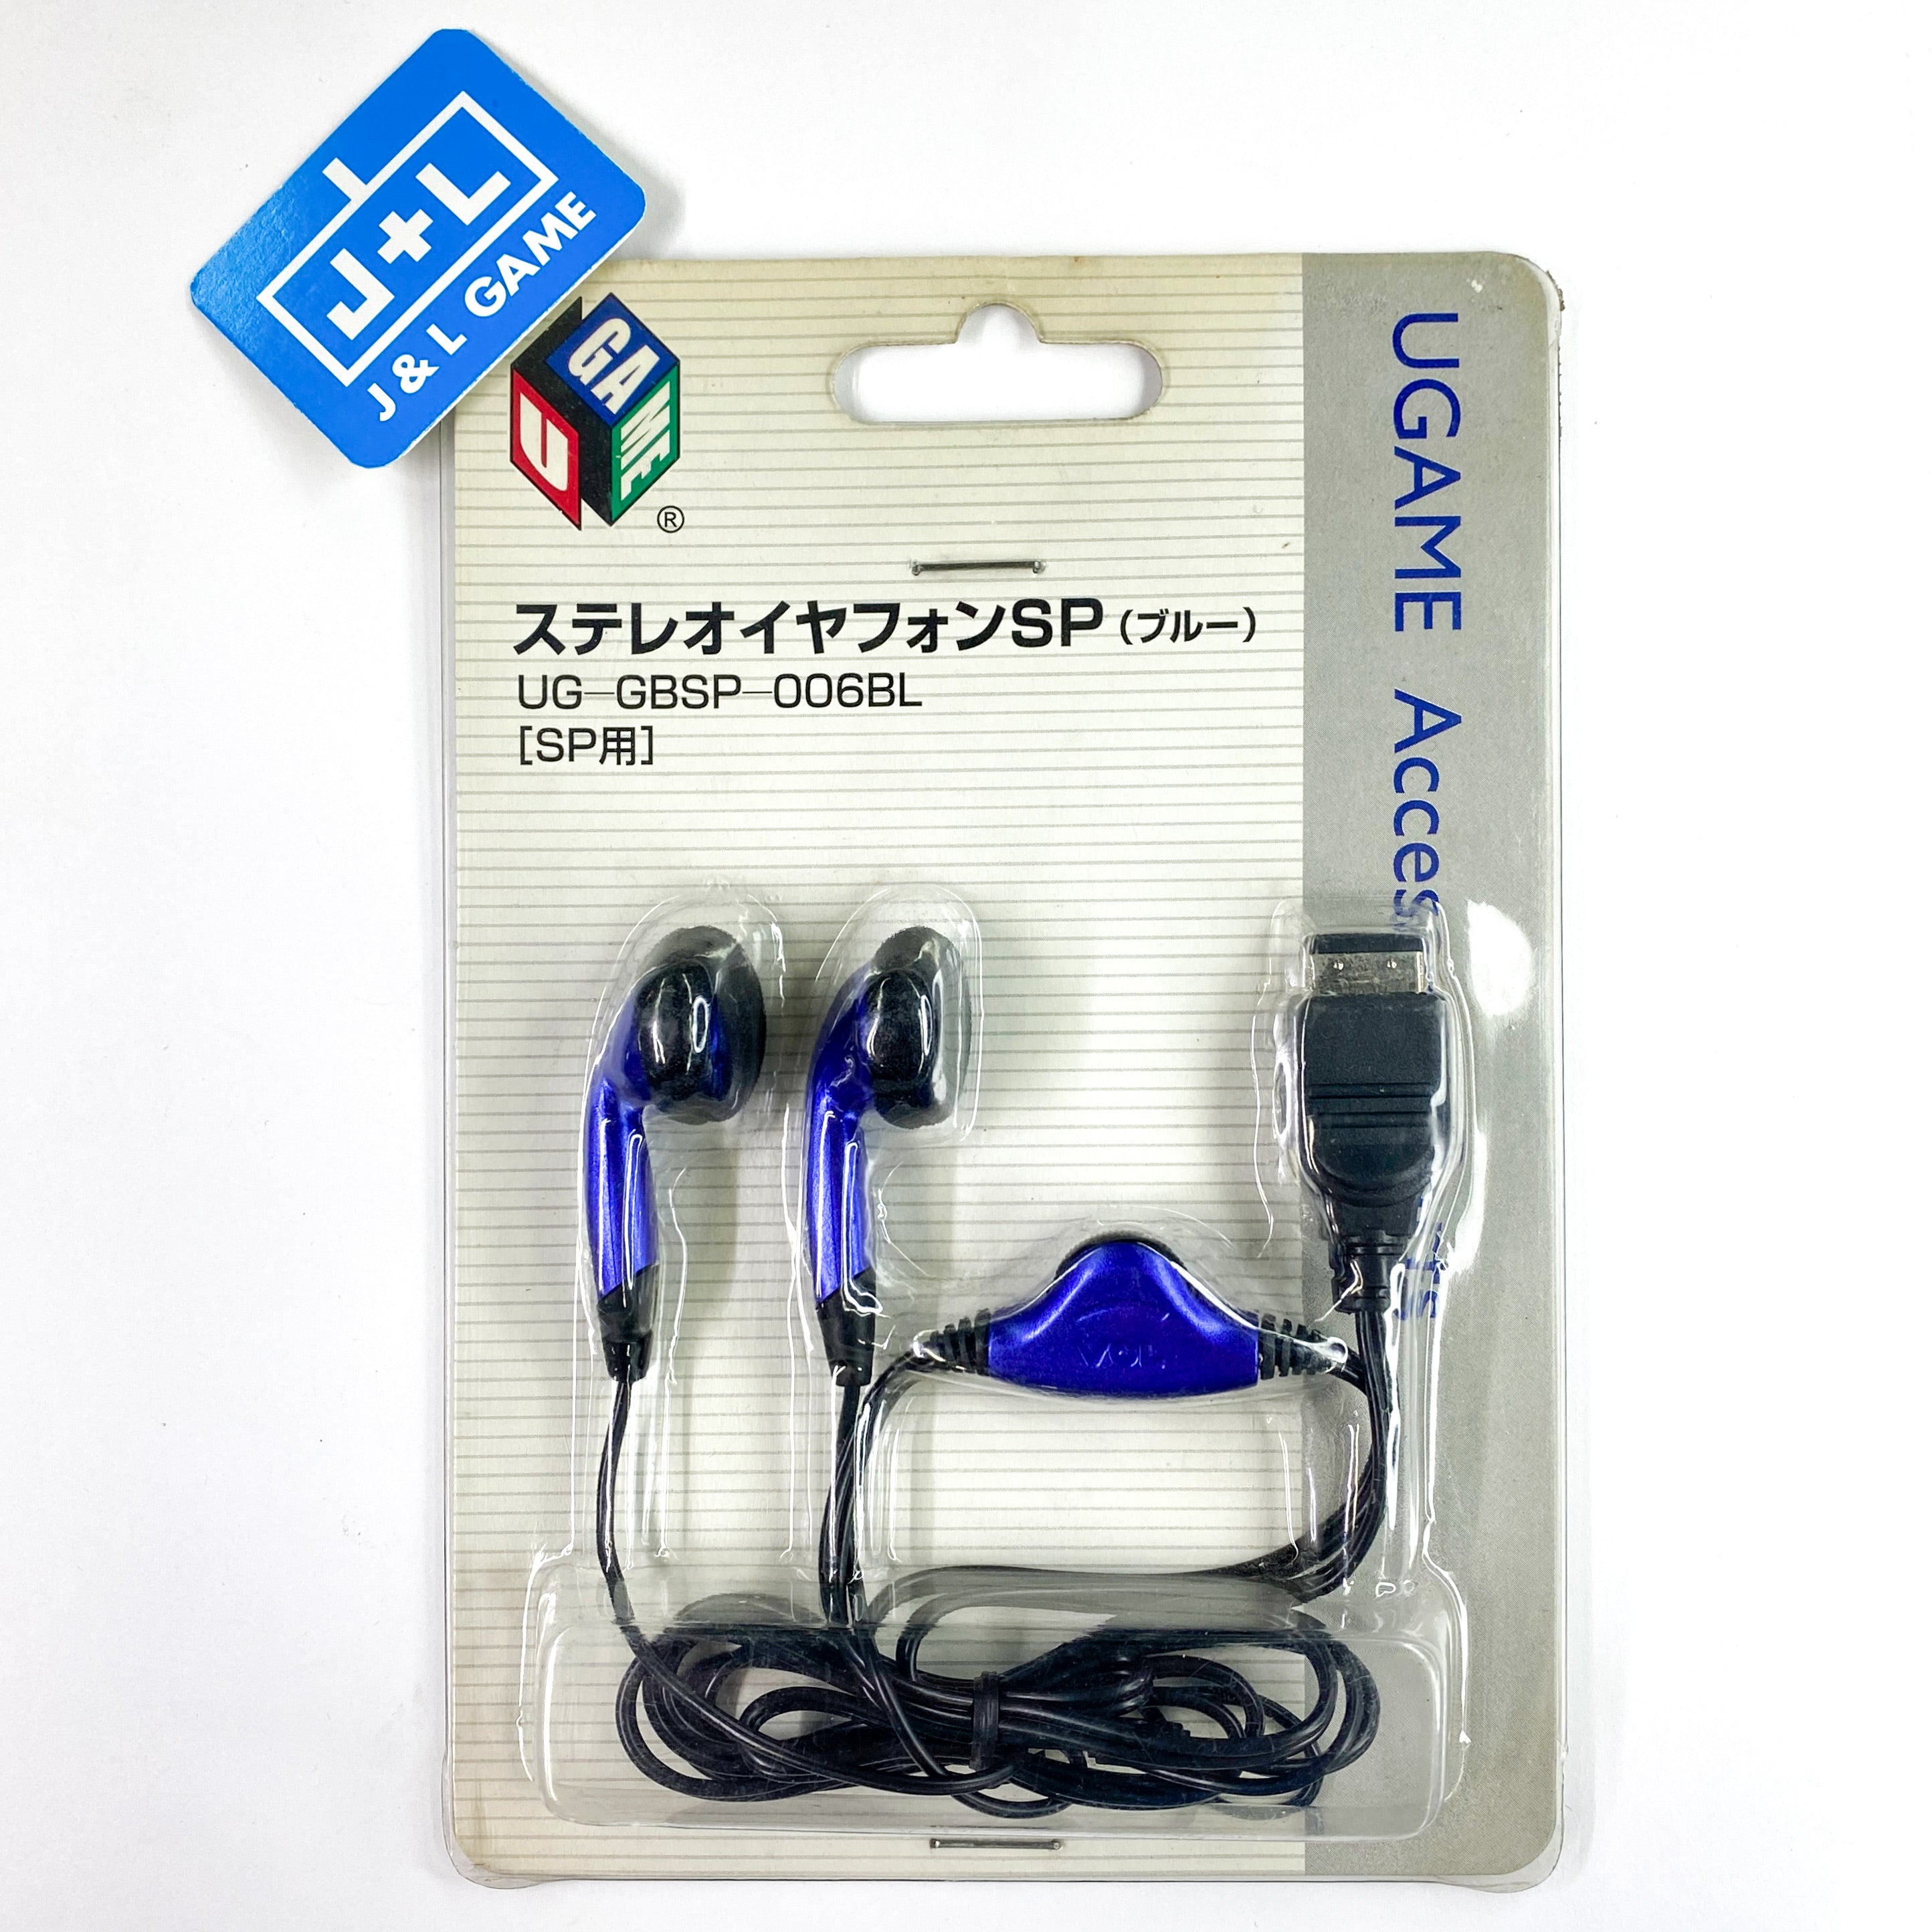 UGAME Nintendo Game boy Advance SP Earphone - Game Boy Advance Accessories Blacell   